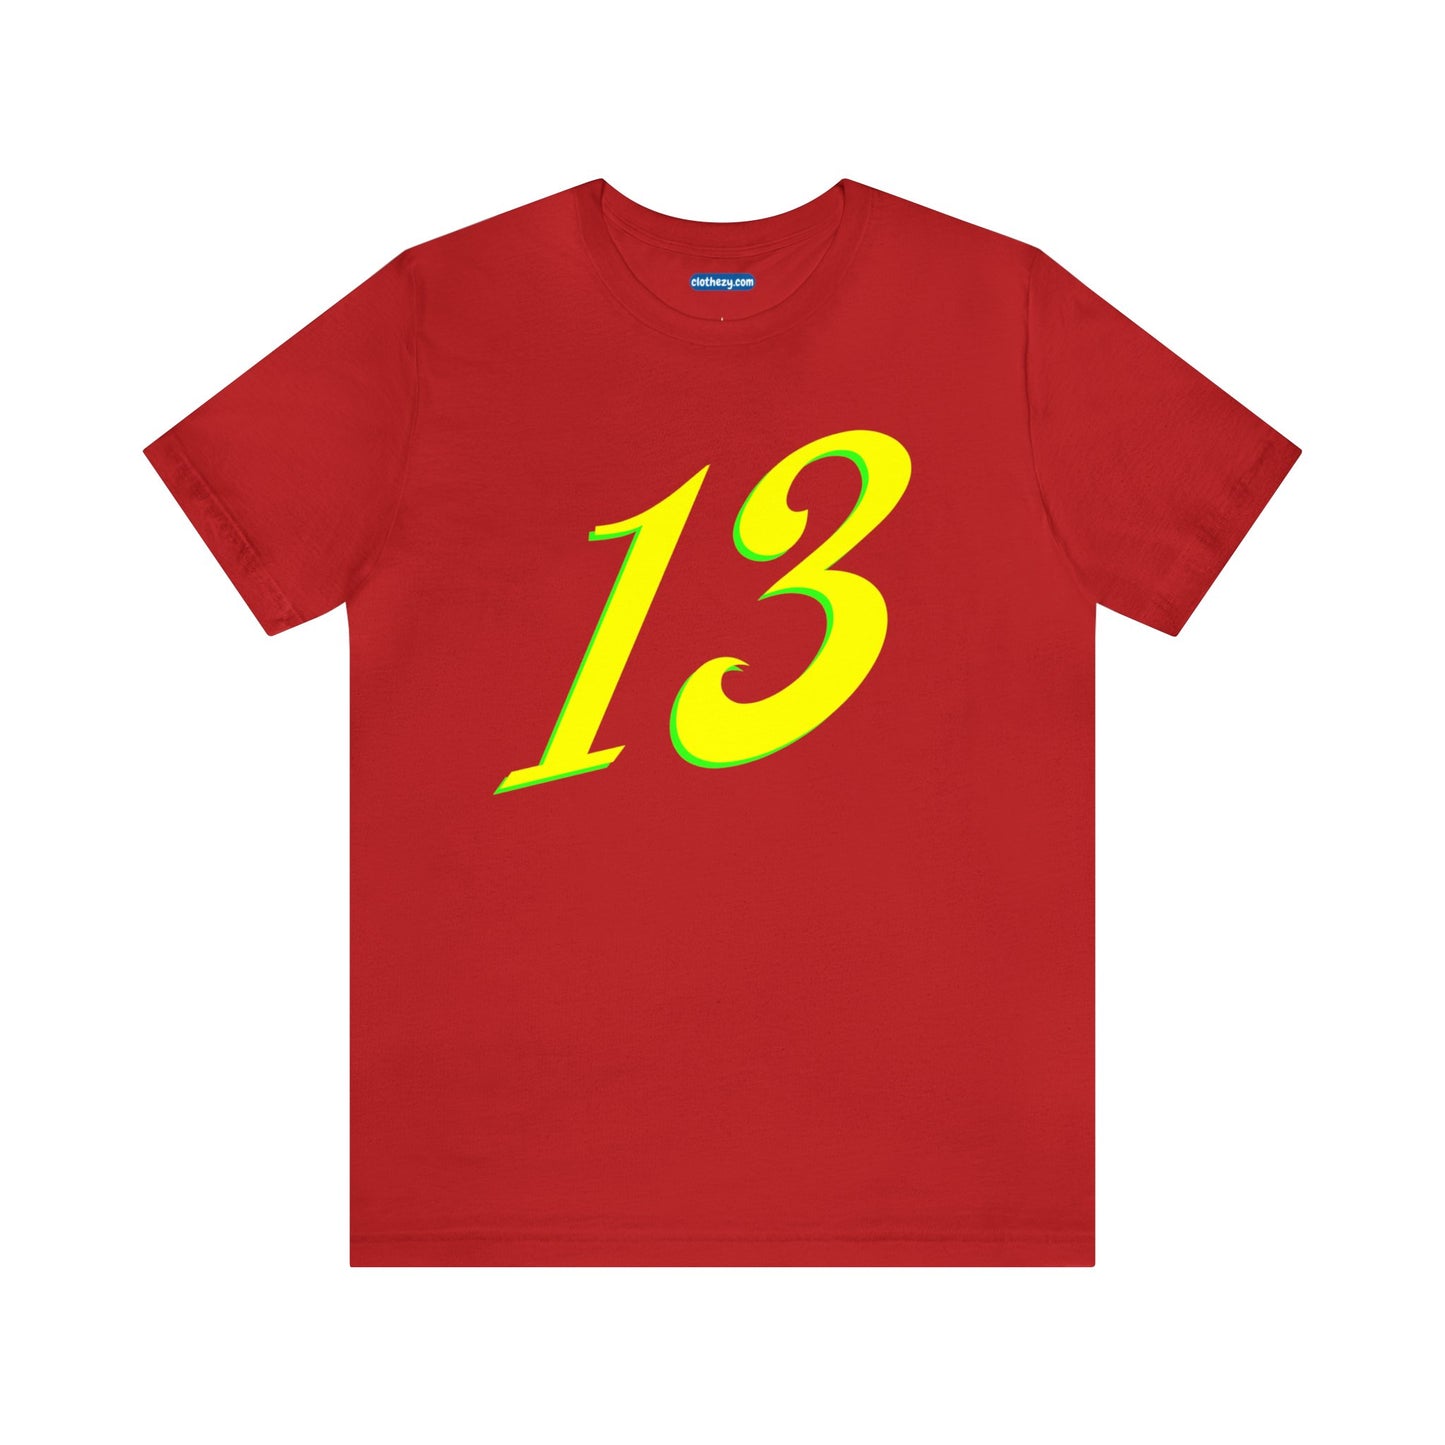 Number 13 Design - Soft Cotton Tee for birthdays and celebrations, Gift for friends and family, Multiple Options by clothezy.com in Red Size Small - Buy Now